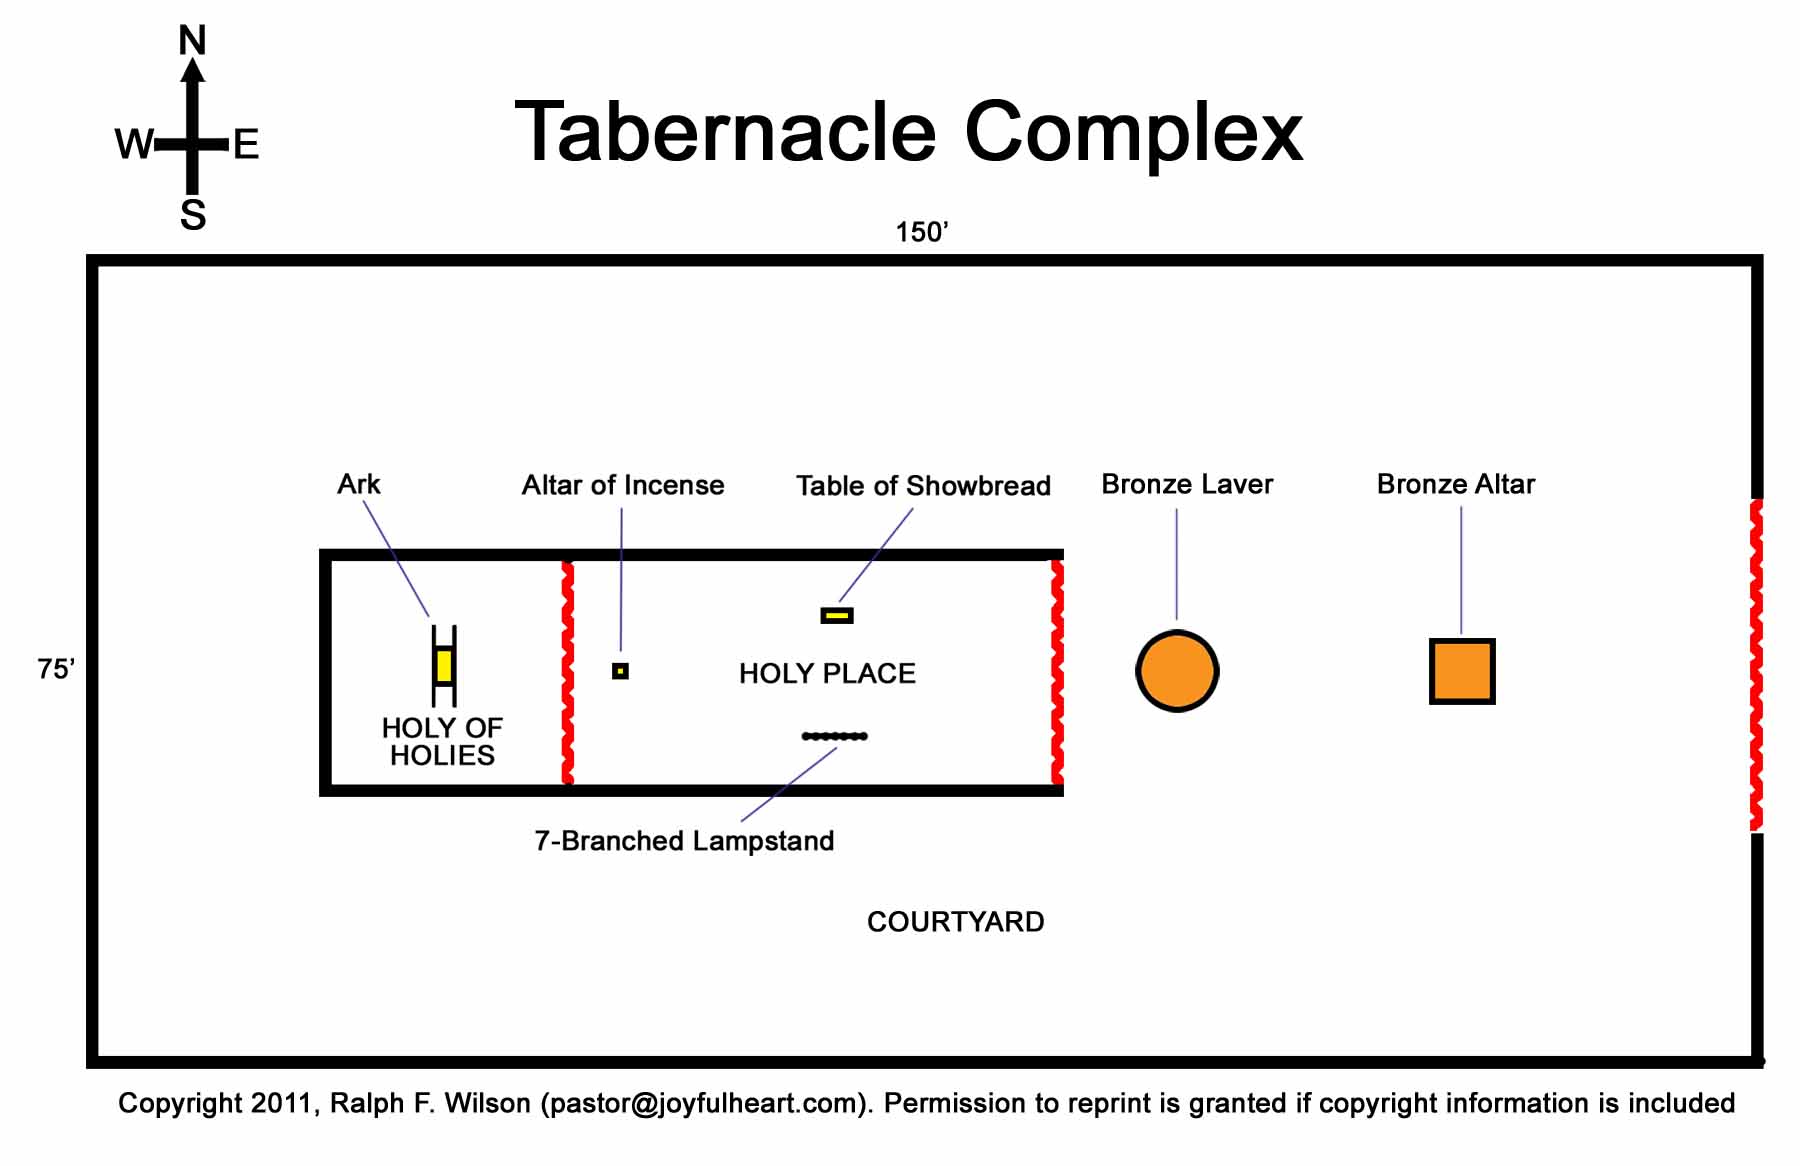 diagram of the tabernacle of moses